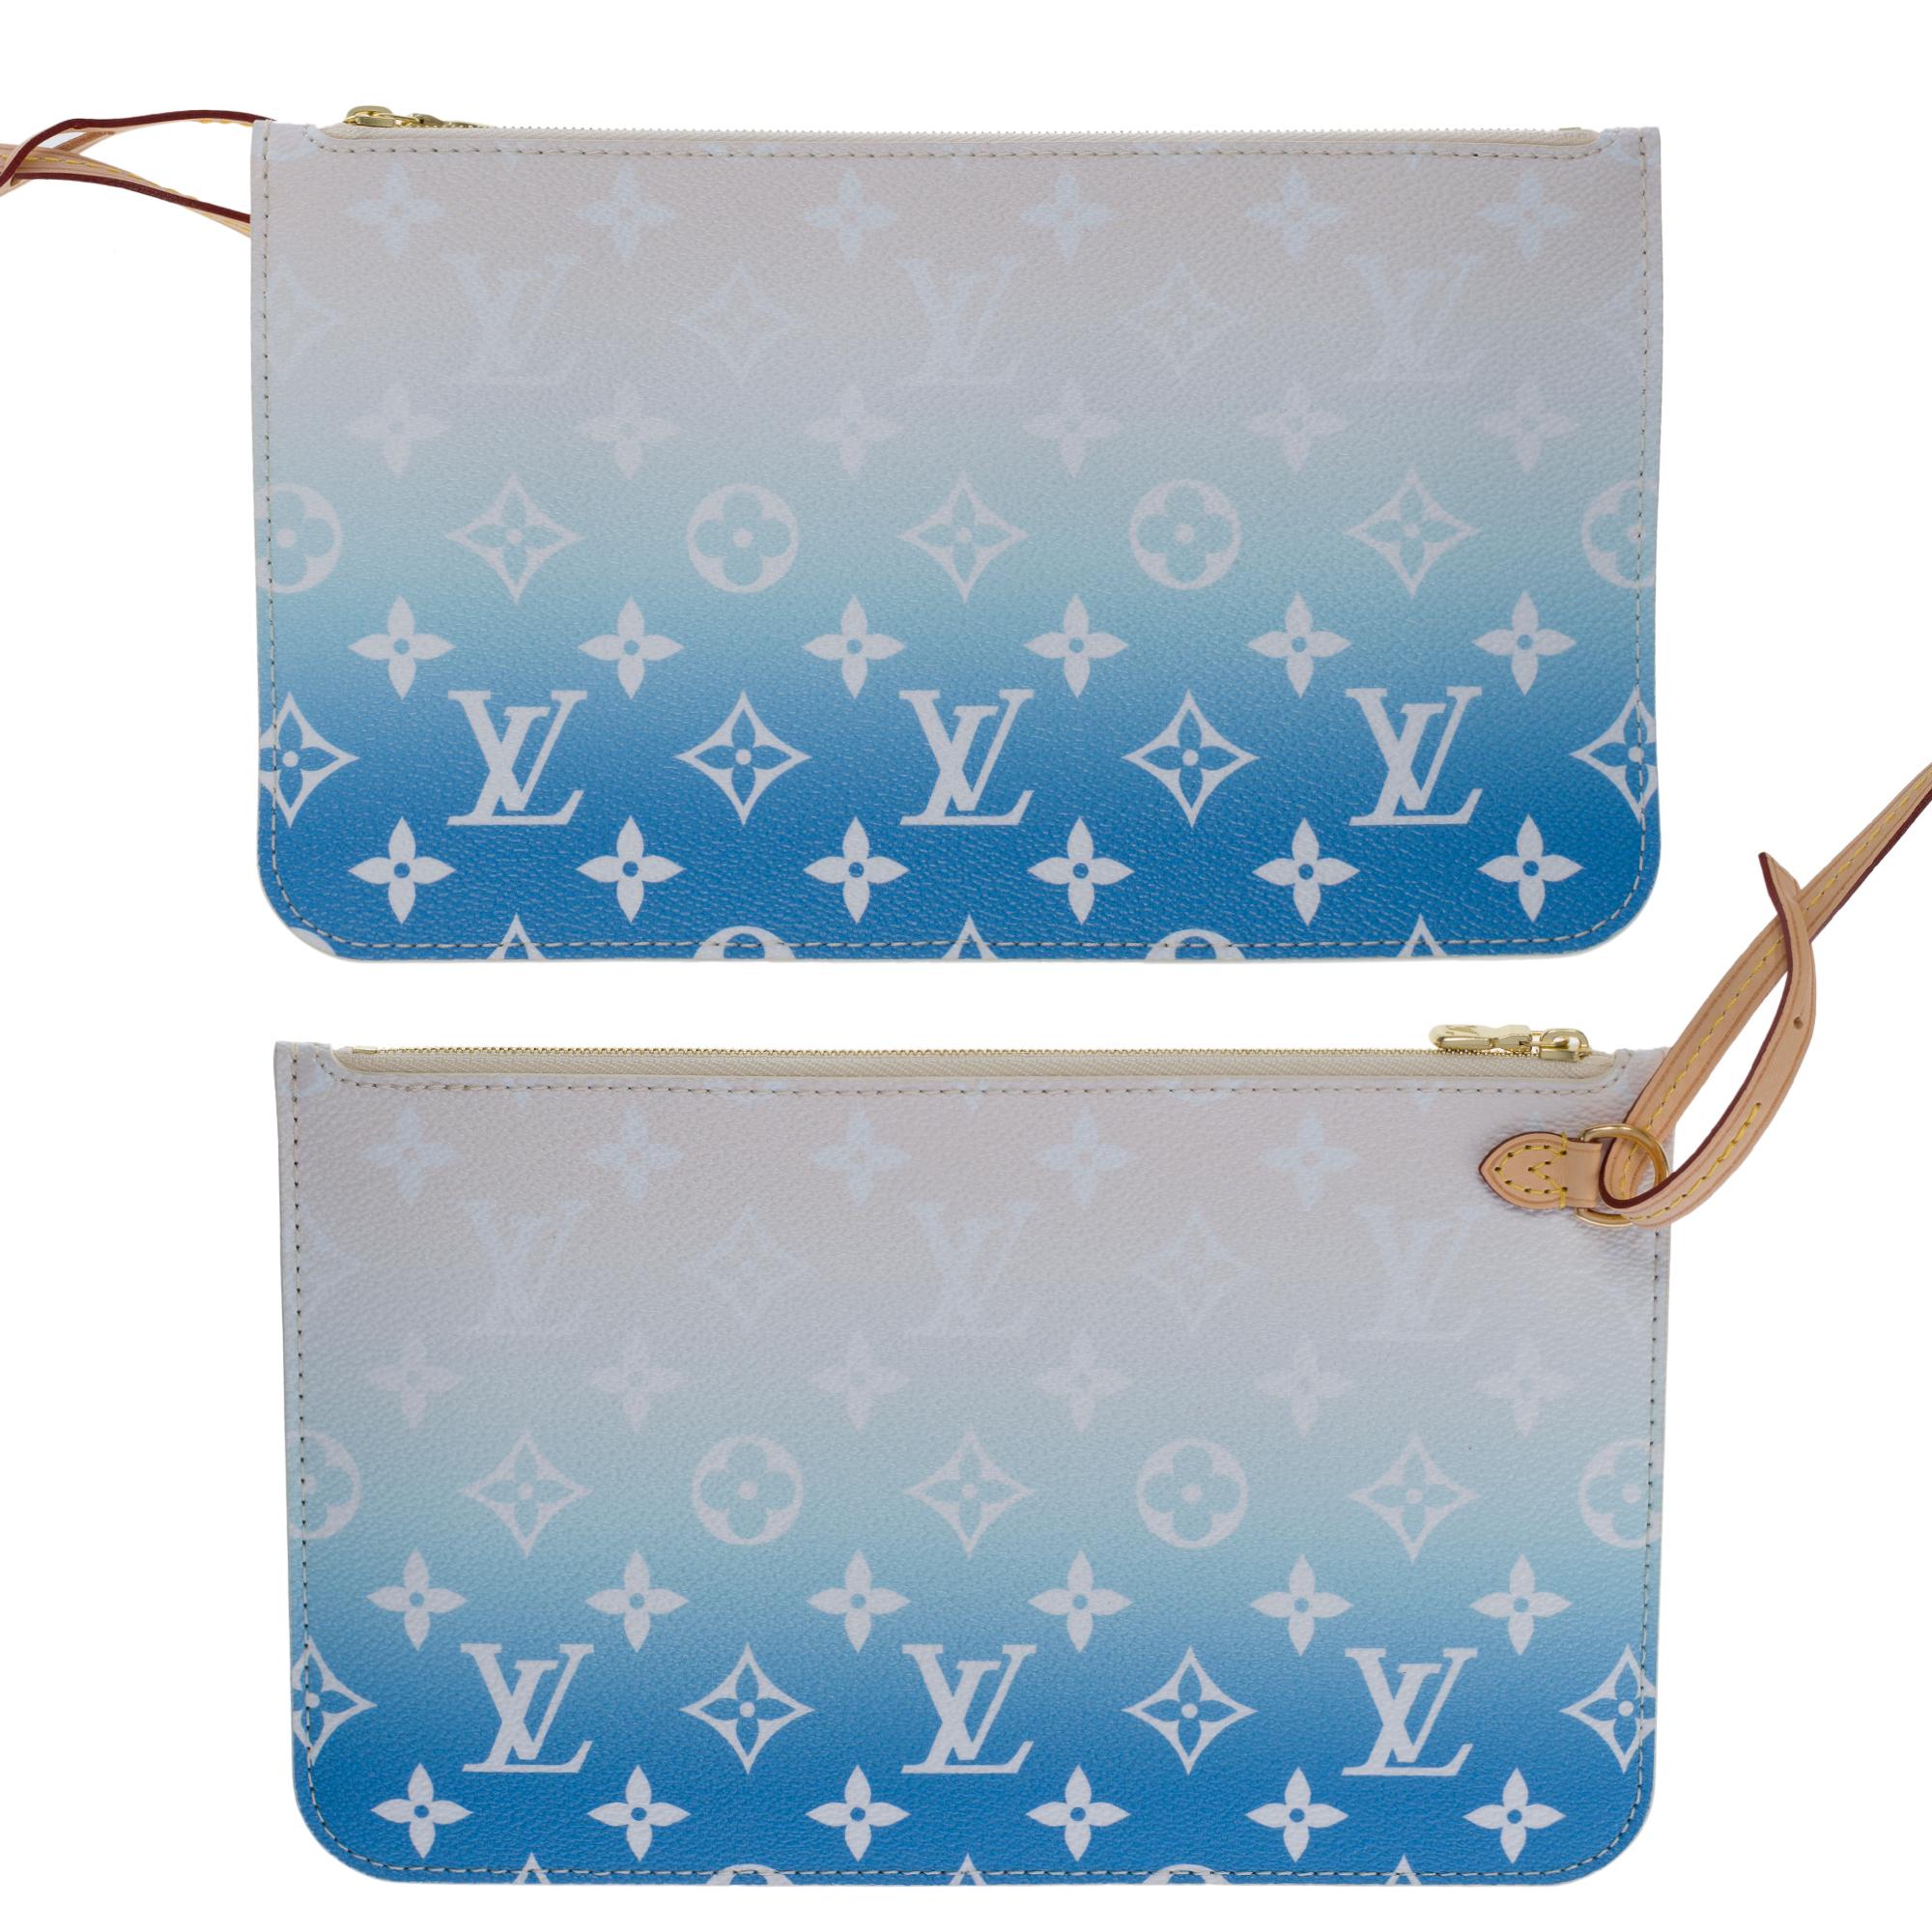 New Louis Vuitton Neverfull MM By the Pool Tote bag in Blue&White Canvas, GHW 10